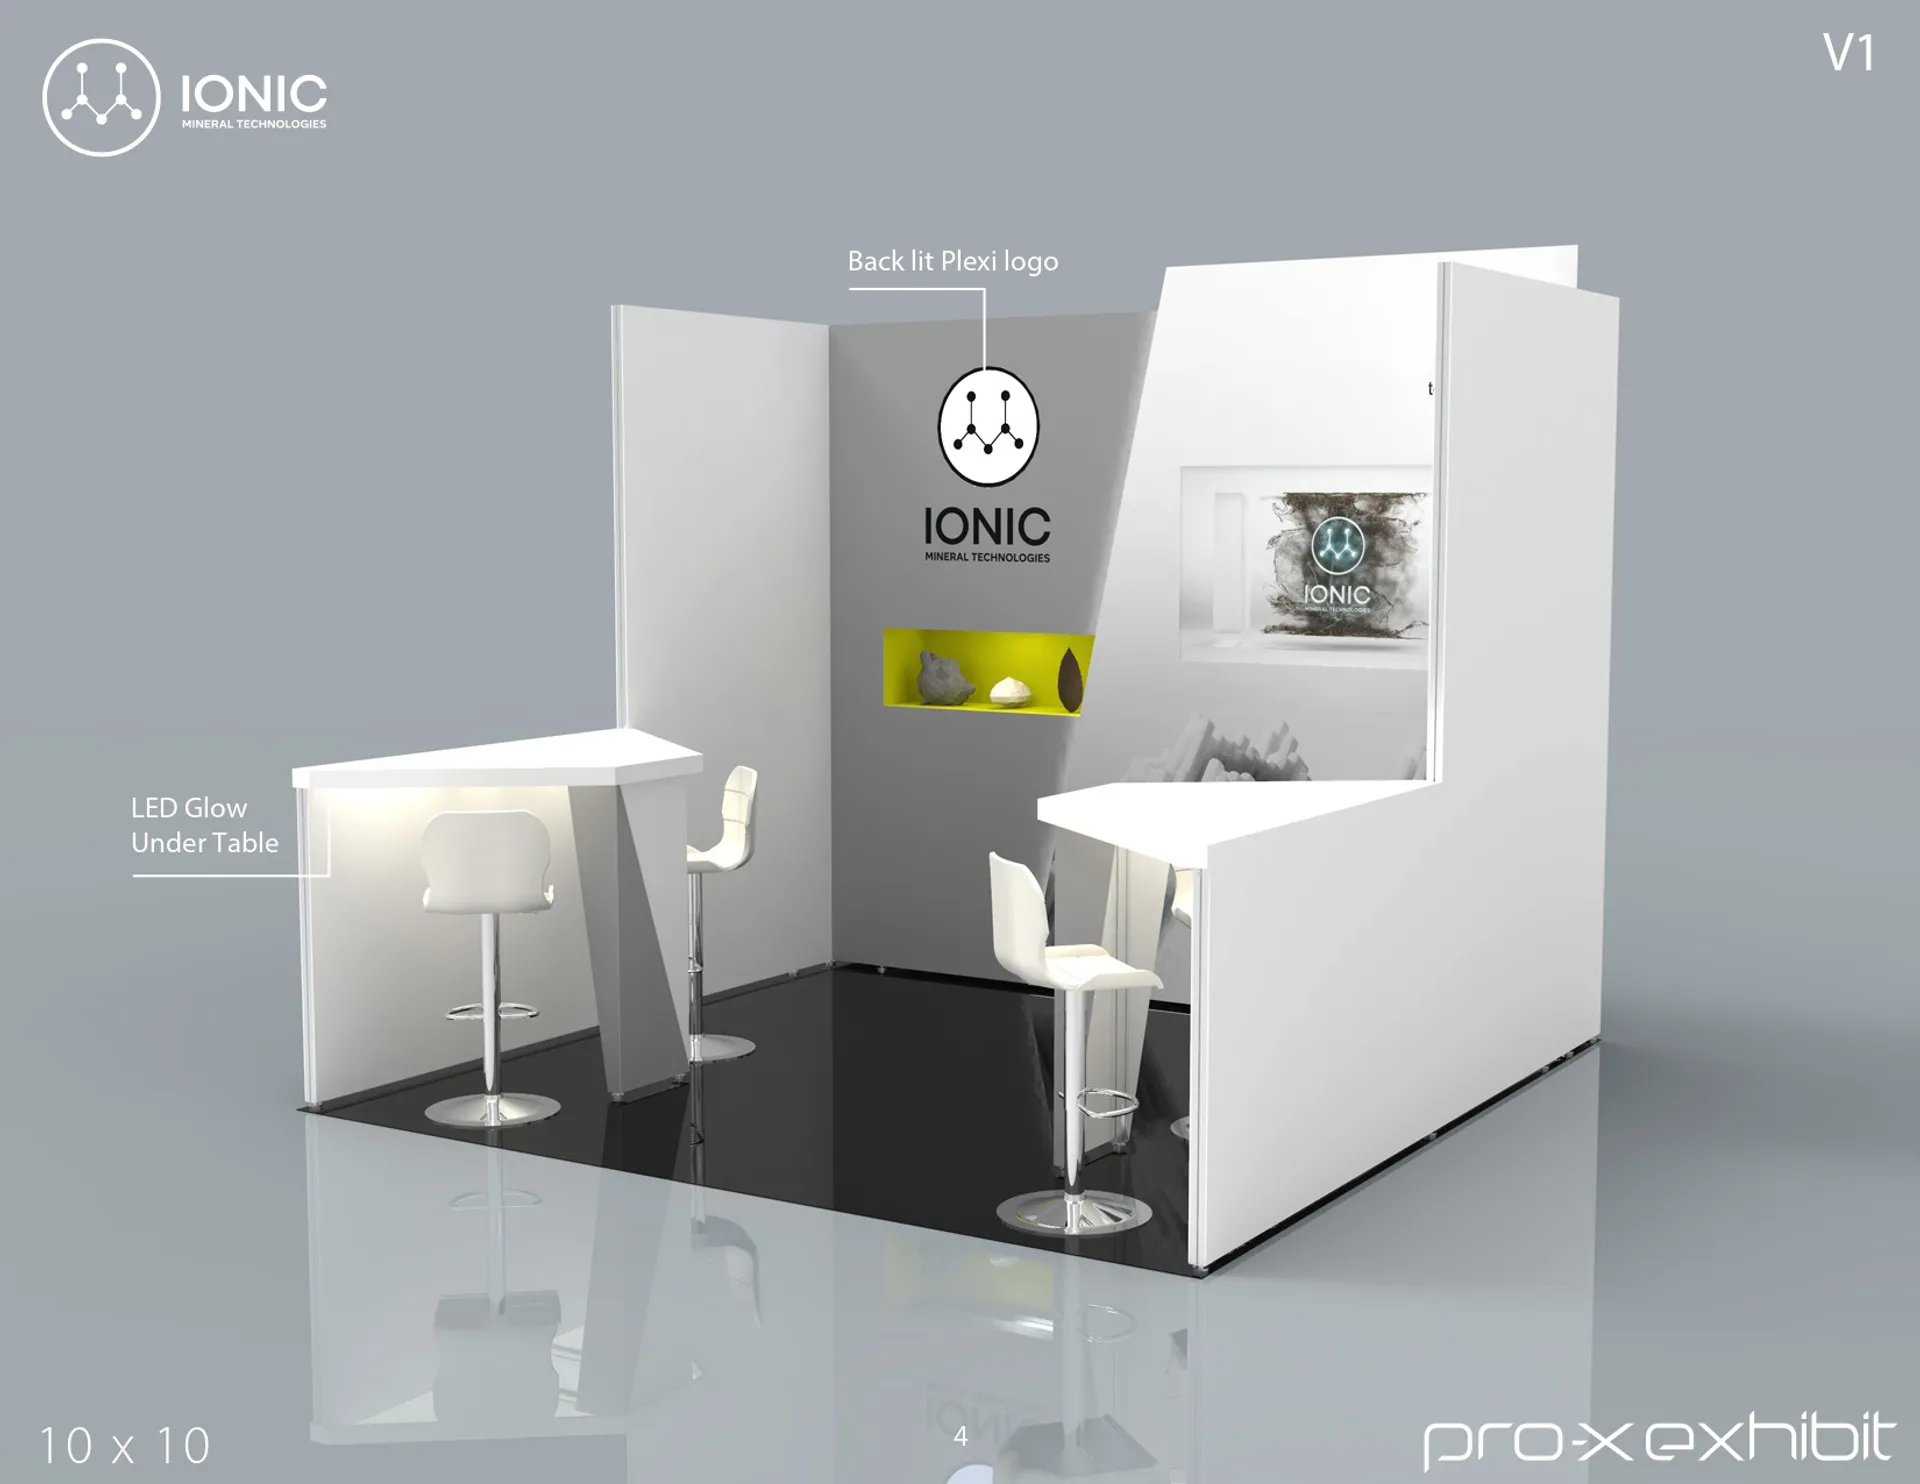 booth-design-projects/Pro-X Exhibits/2024-04-18-10x10-INLINE-Project-115/IONIC-TheBatteryShow-10x10-2022-Prox-V1 (1)-4_page-0001-x8cjst.jpg